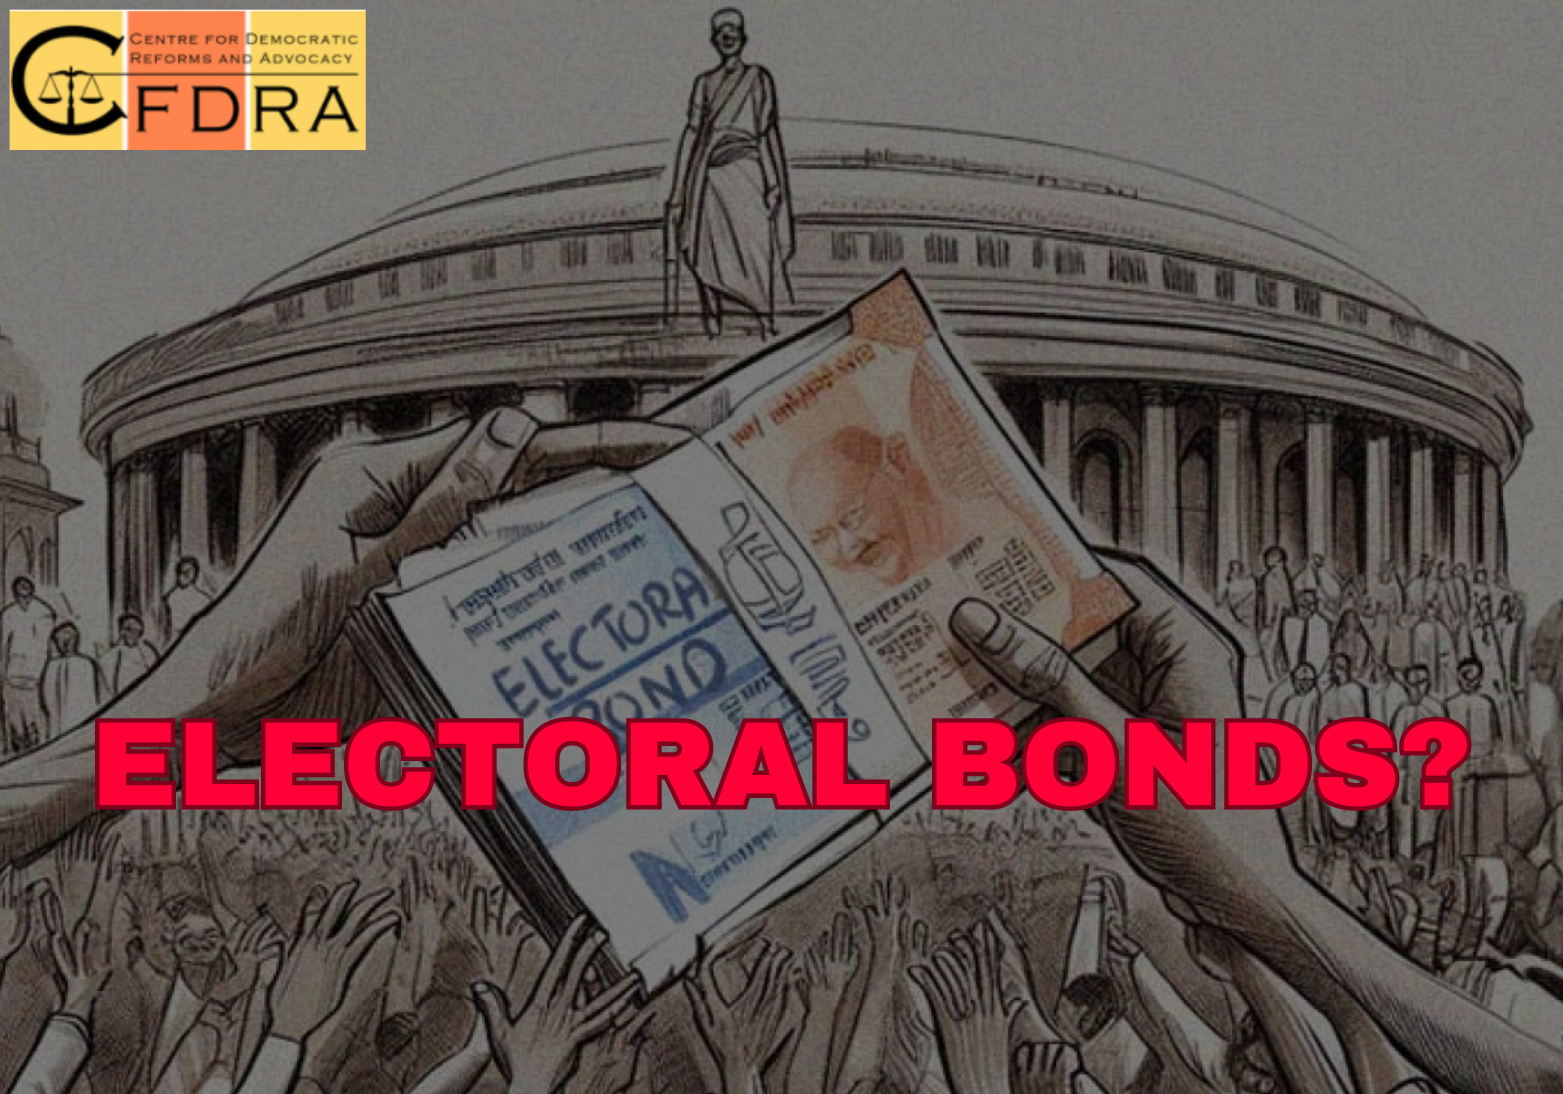 BJP Leads Electoral Bond Collection, But Congress Shows Strength in Key Areas: Data Analysis